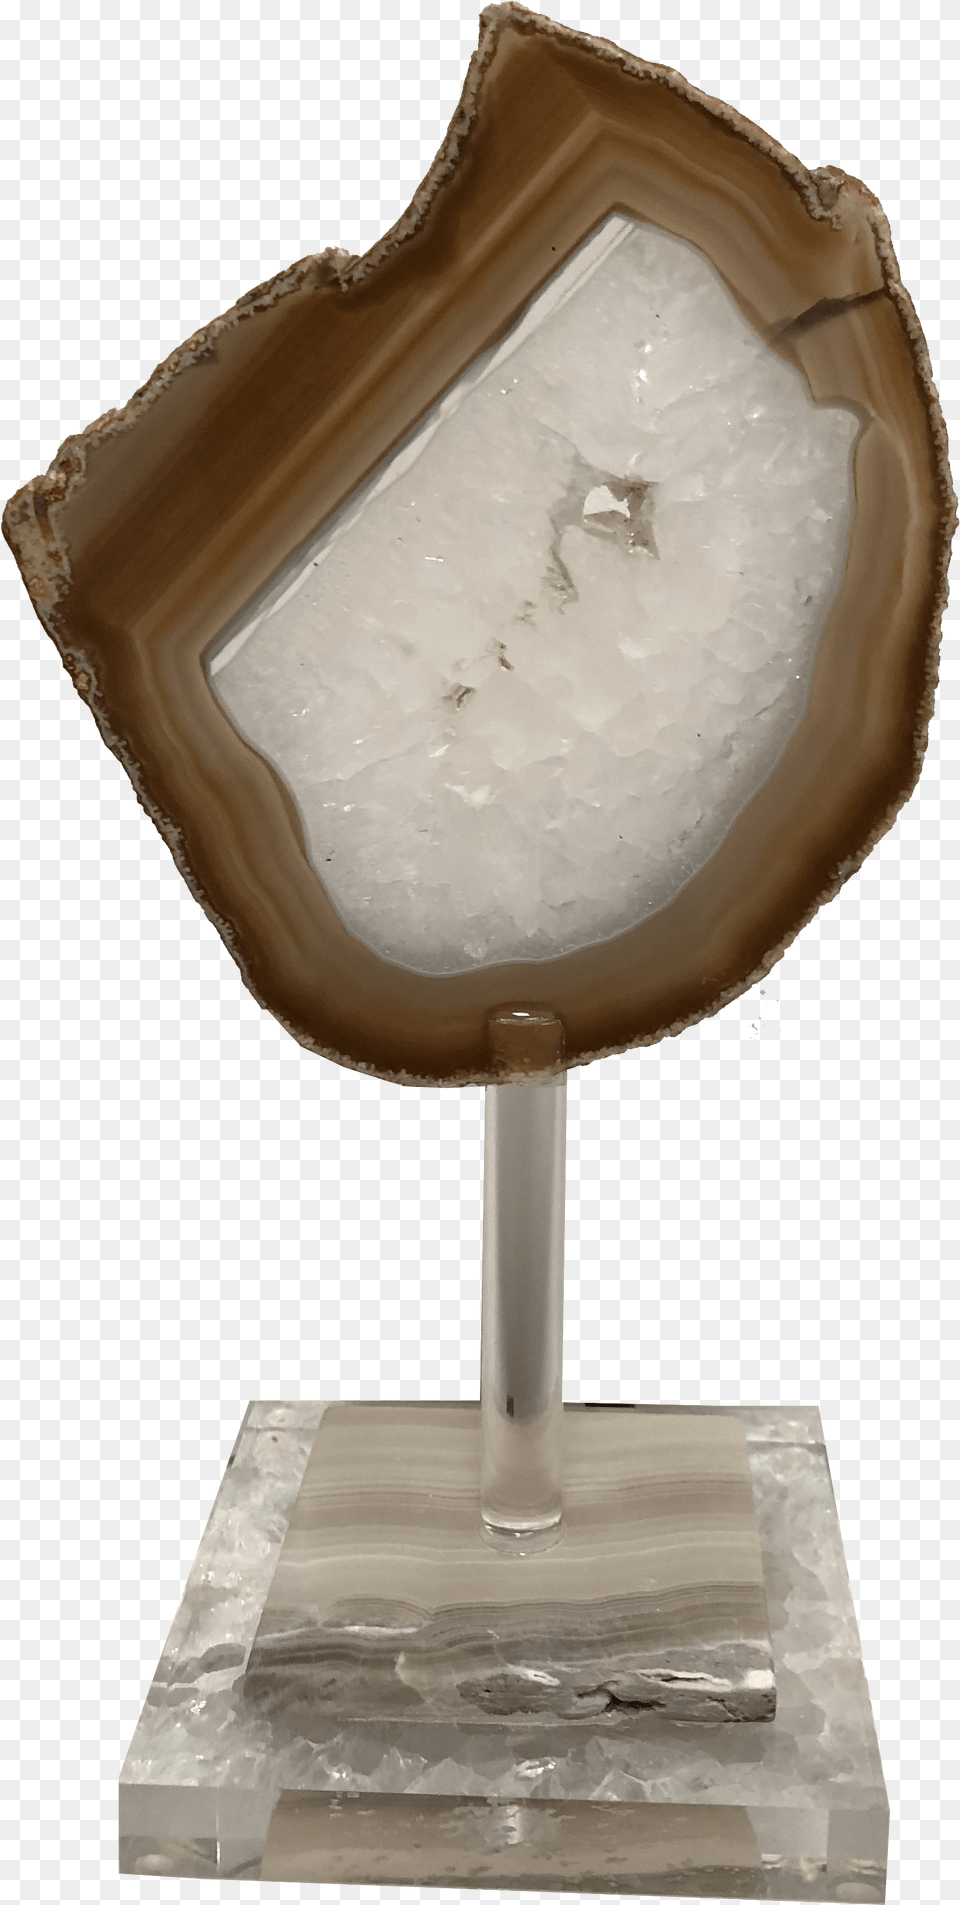 Agate Slice On Onyx And Lucite Base, Crystal, Mineral, Quartz, Accessories Free Png Download